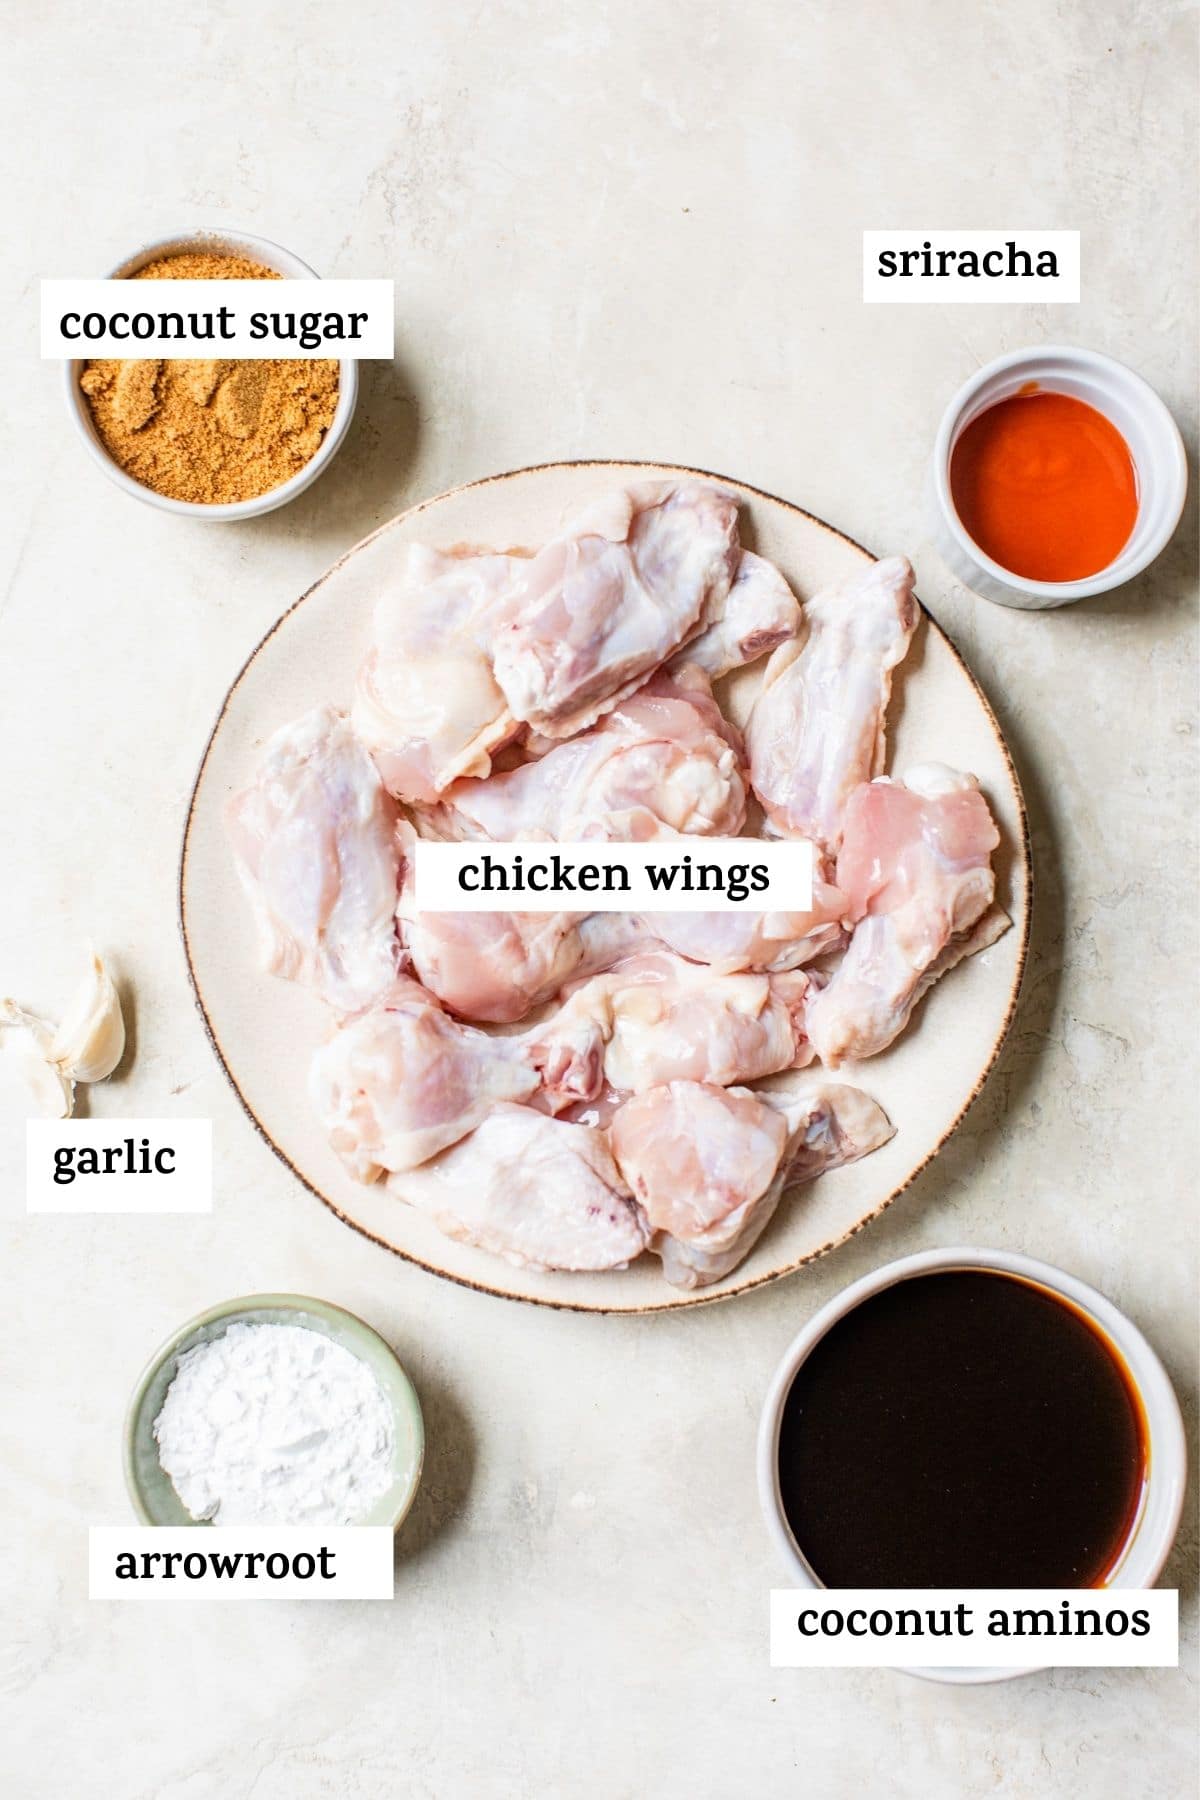 chicken wing ingredients on a board